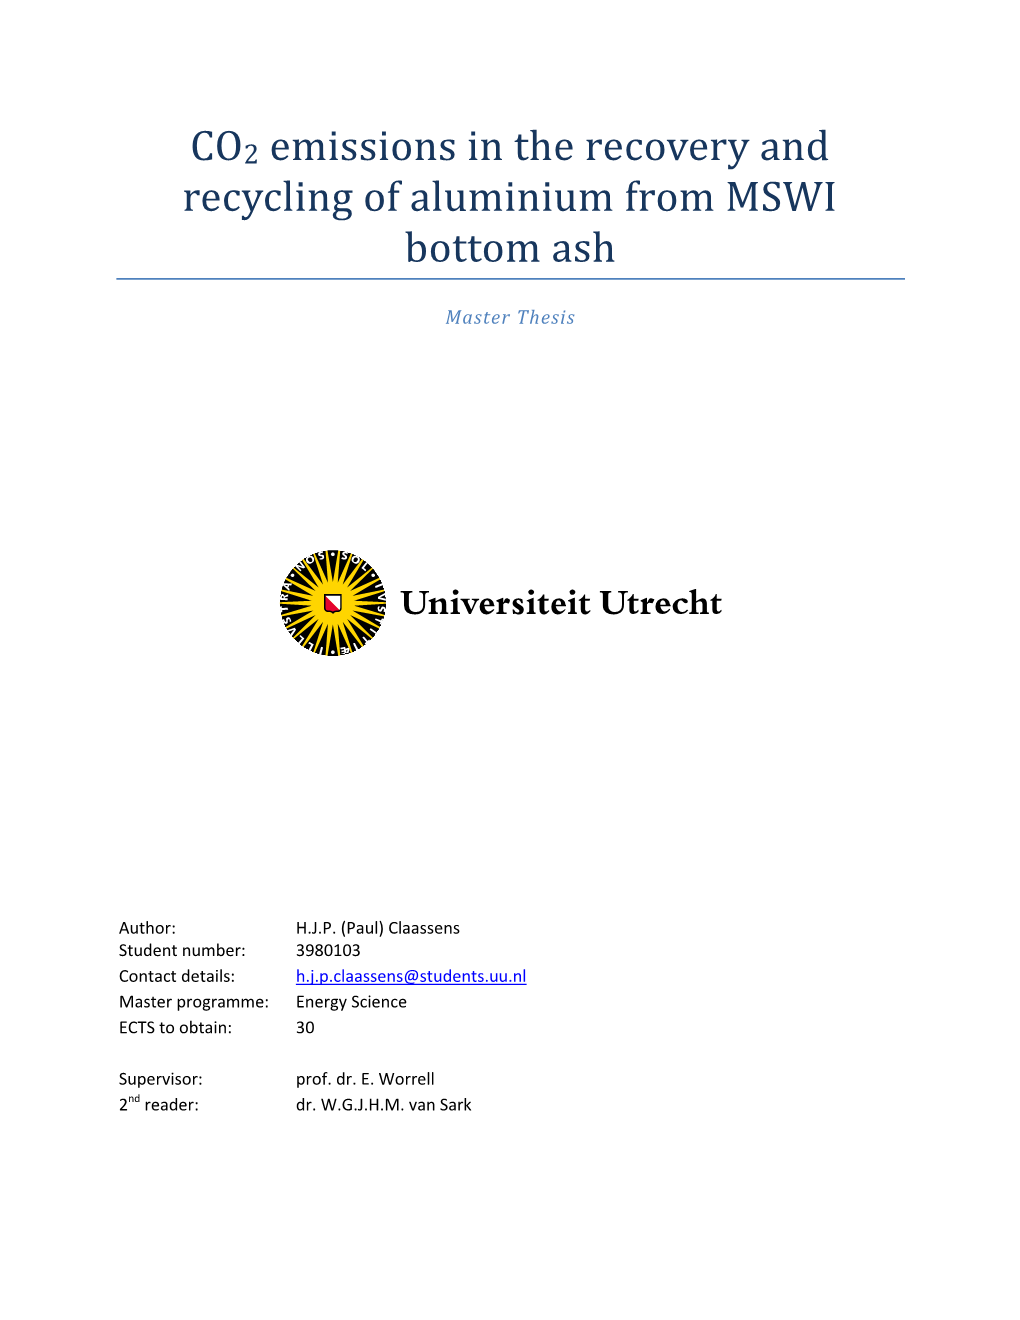 CO2 Emissions in the Recovery and Recycling of Aluminium from MSWI Bottom Ash